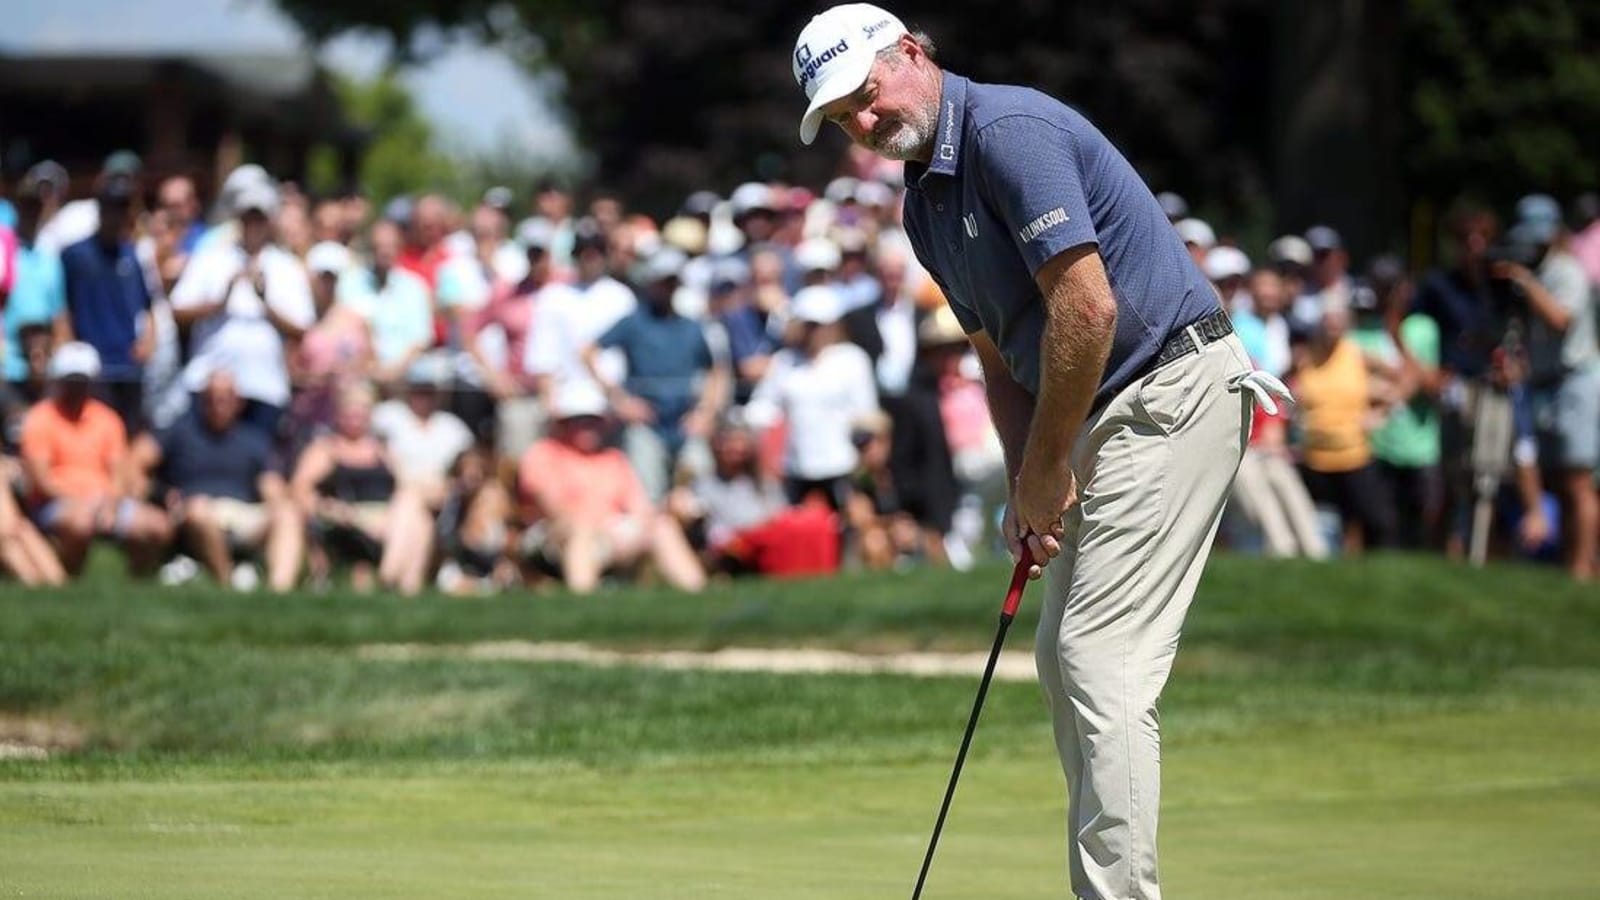 Jerry Kelly earns Dominion Energy lead with bogey-free 65